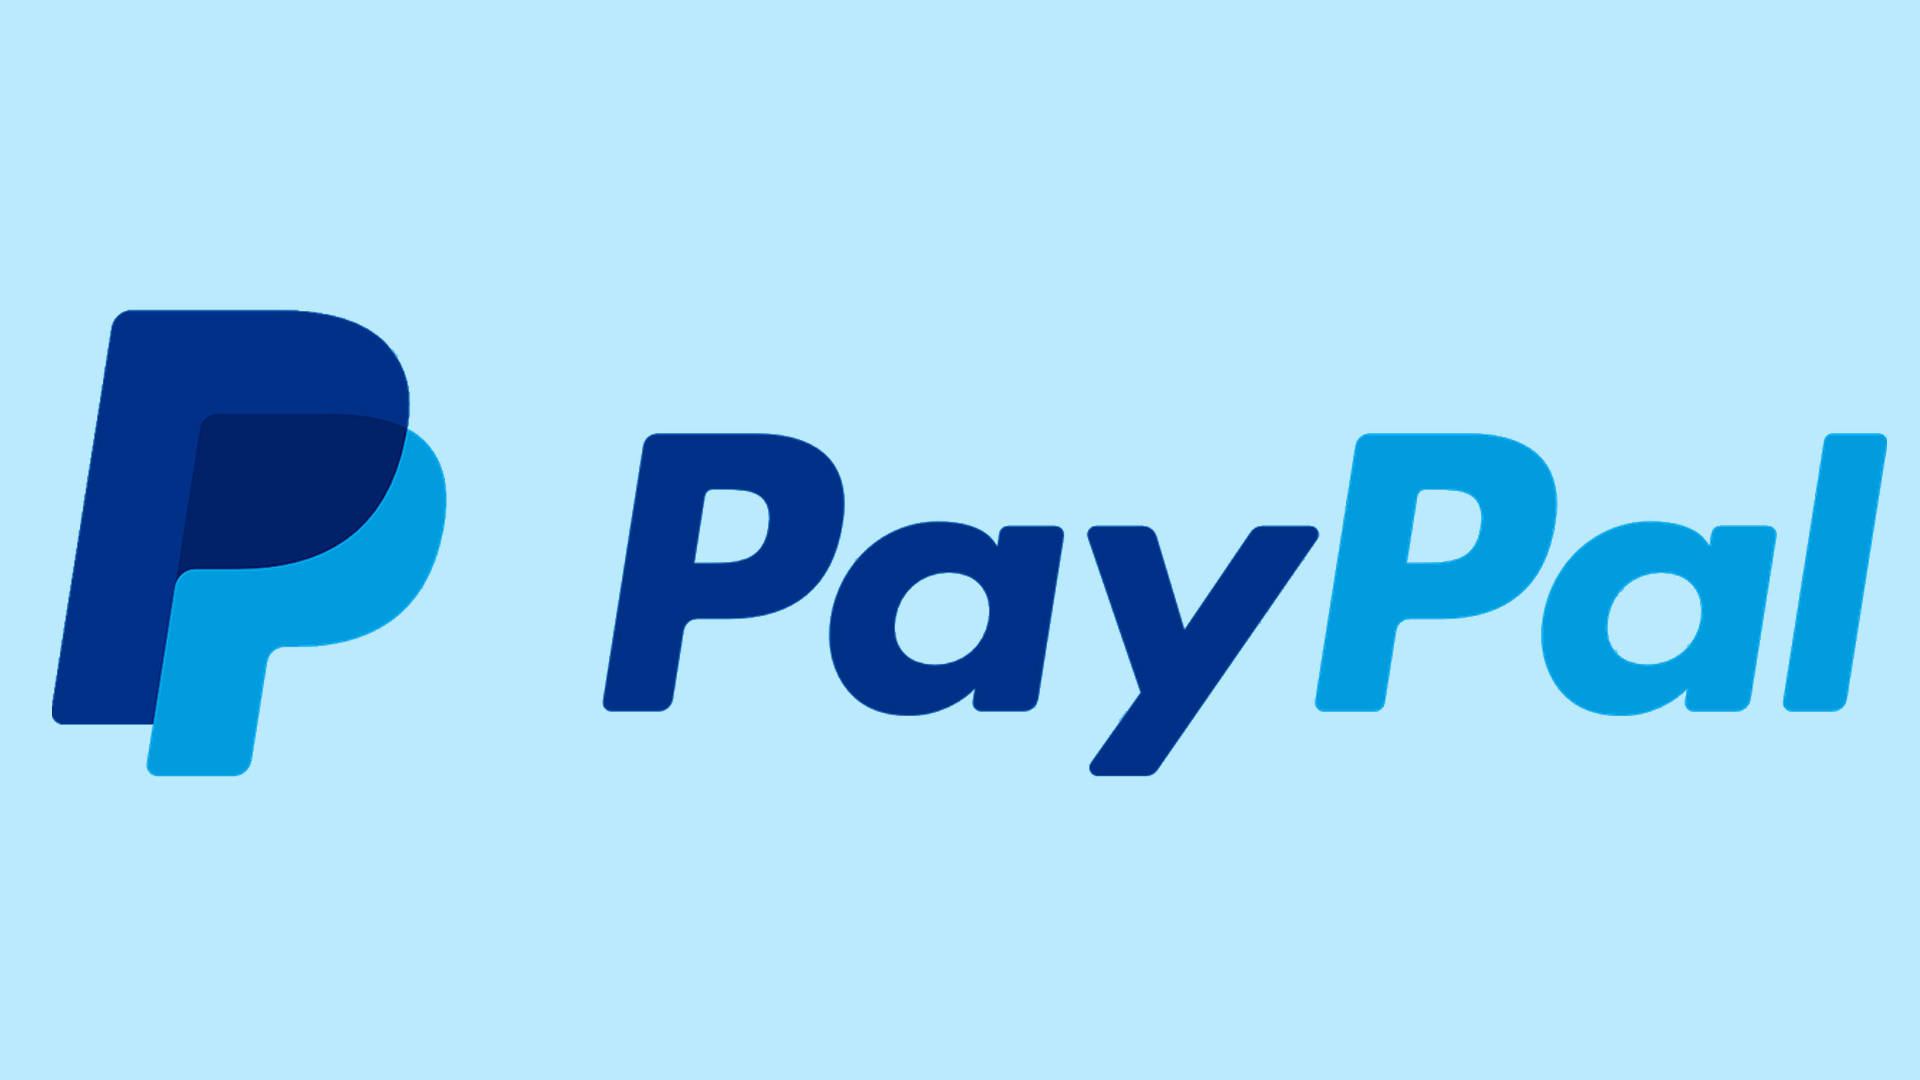 Paypal Light Blue Background Wallpaper